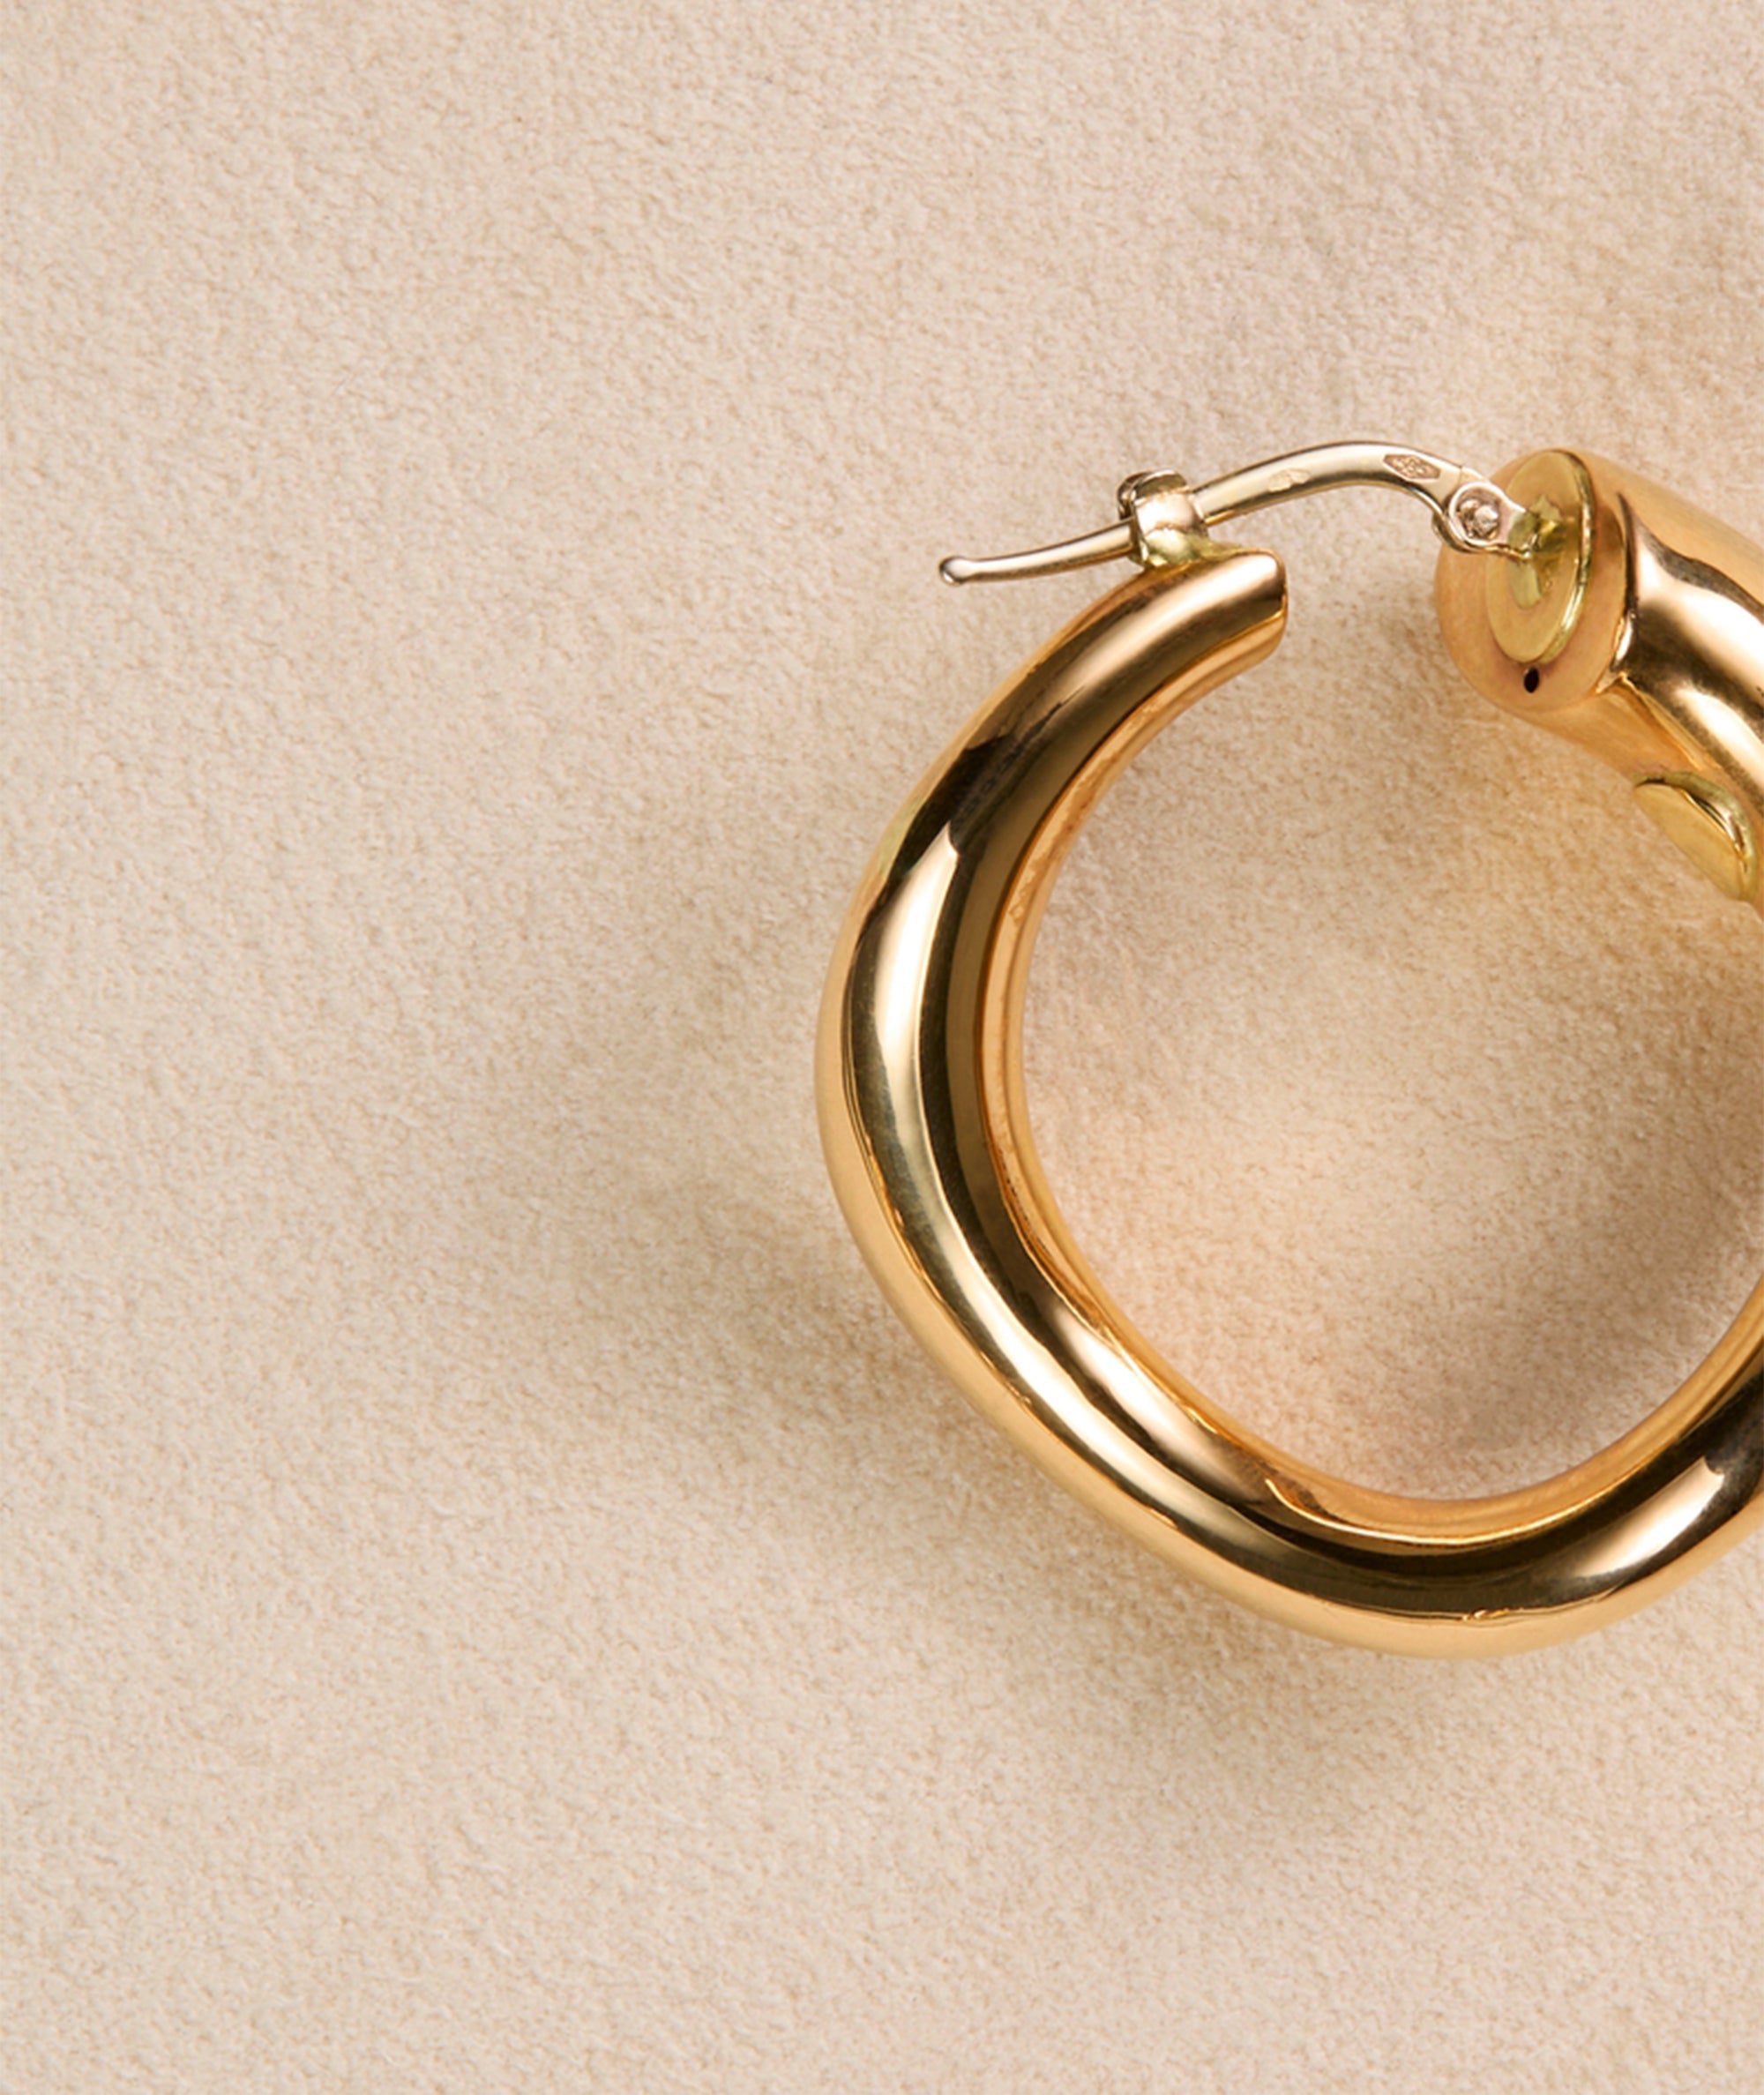 Vintage hoop earrings in yellow gold. Exclusively sourced for EREDE Curated.